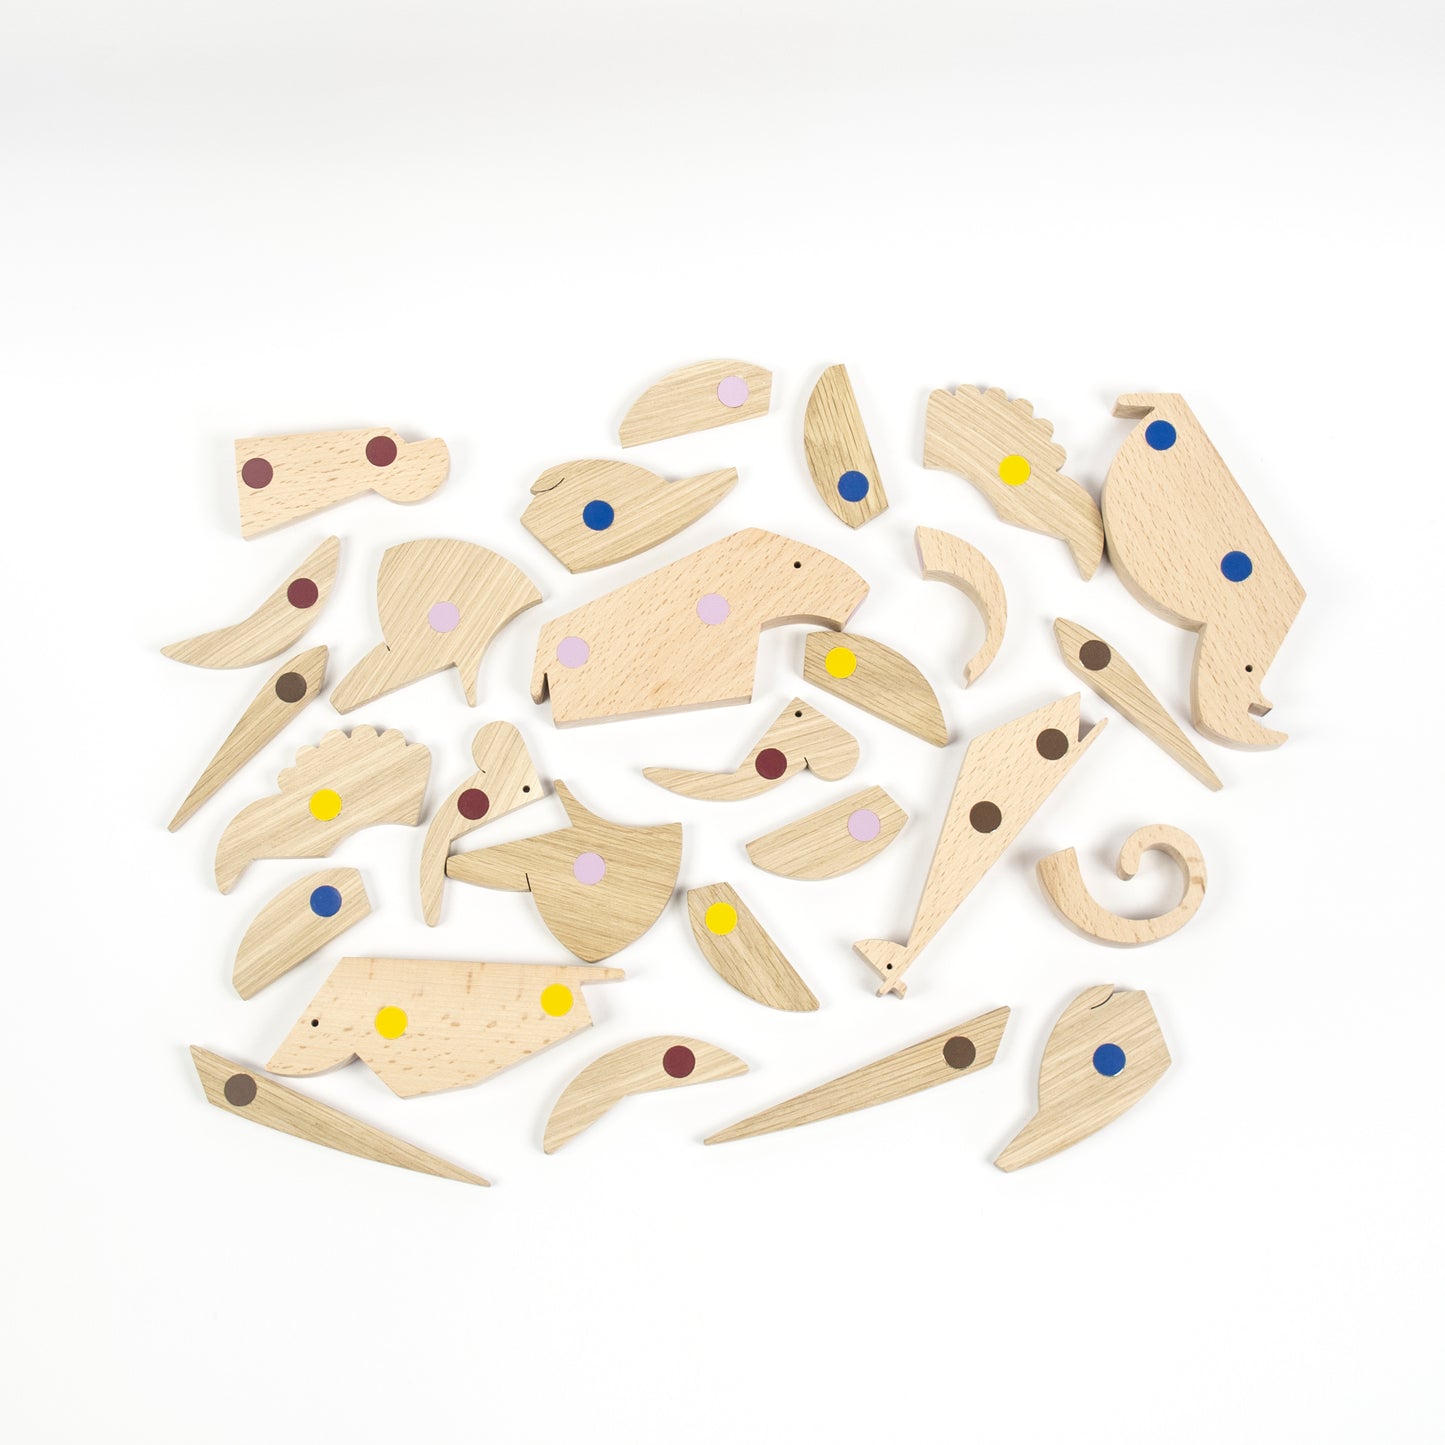 Magnetic wooden toy animals assembled from various shapes and forms- connect the coloured dots together!